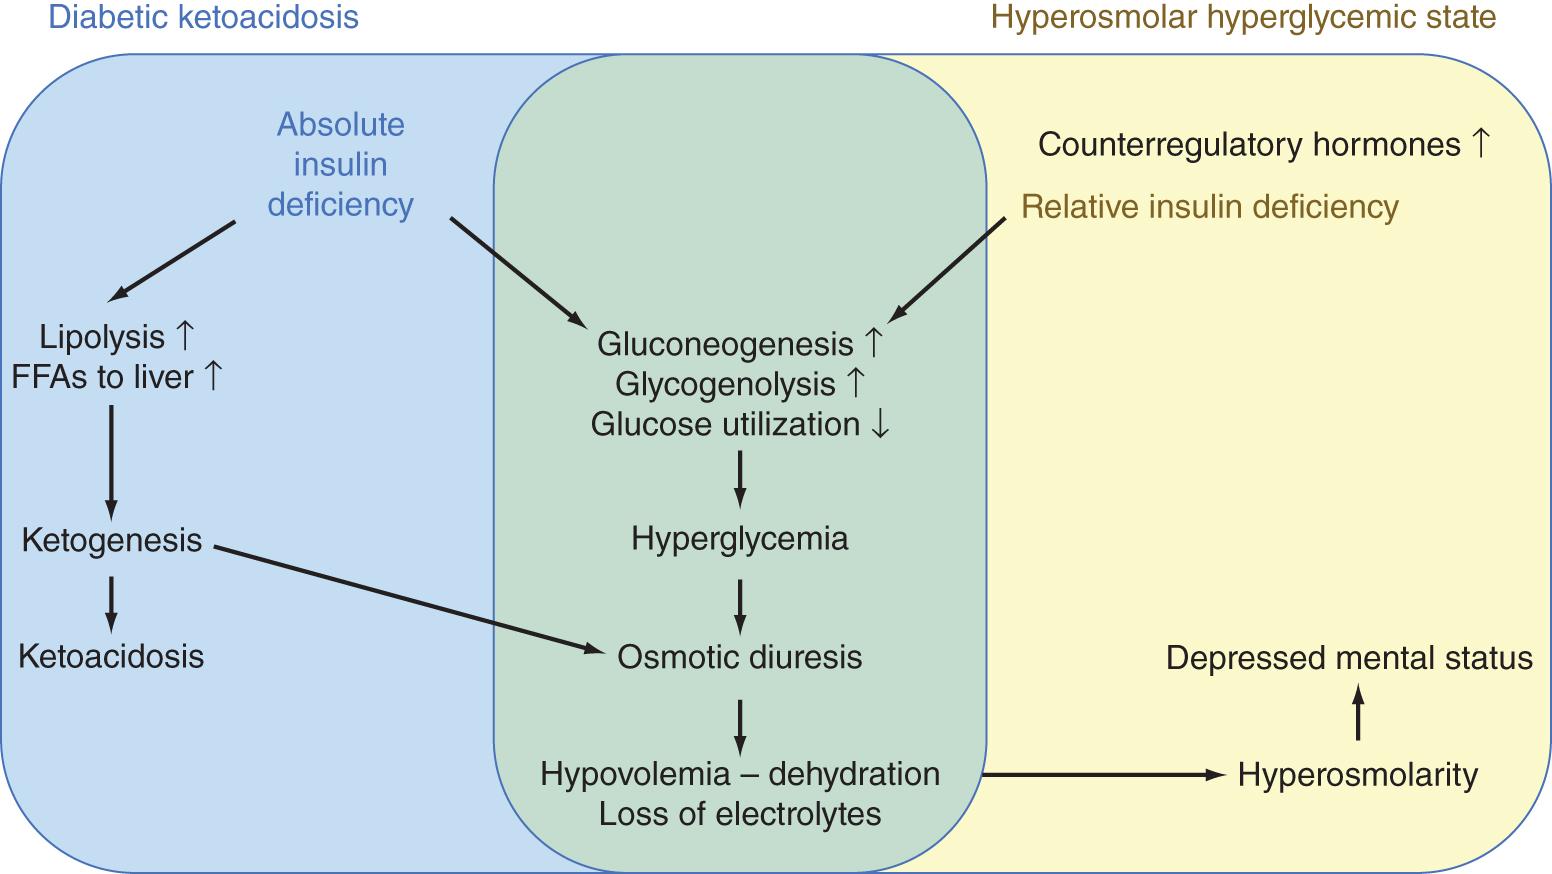 Fig. 135.1, Pathophysiology of Diabetic Ketoacidosis and Hyperosmolar Hyperglycemic State.